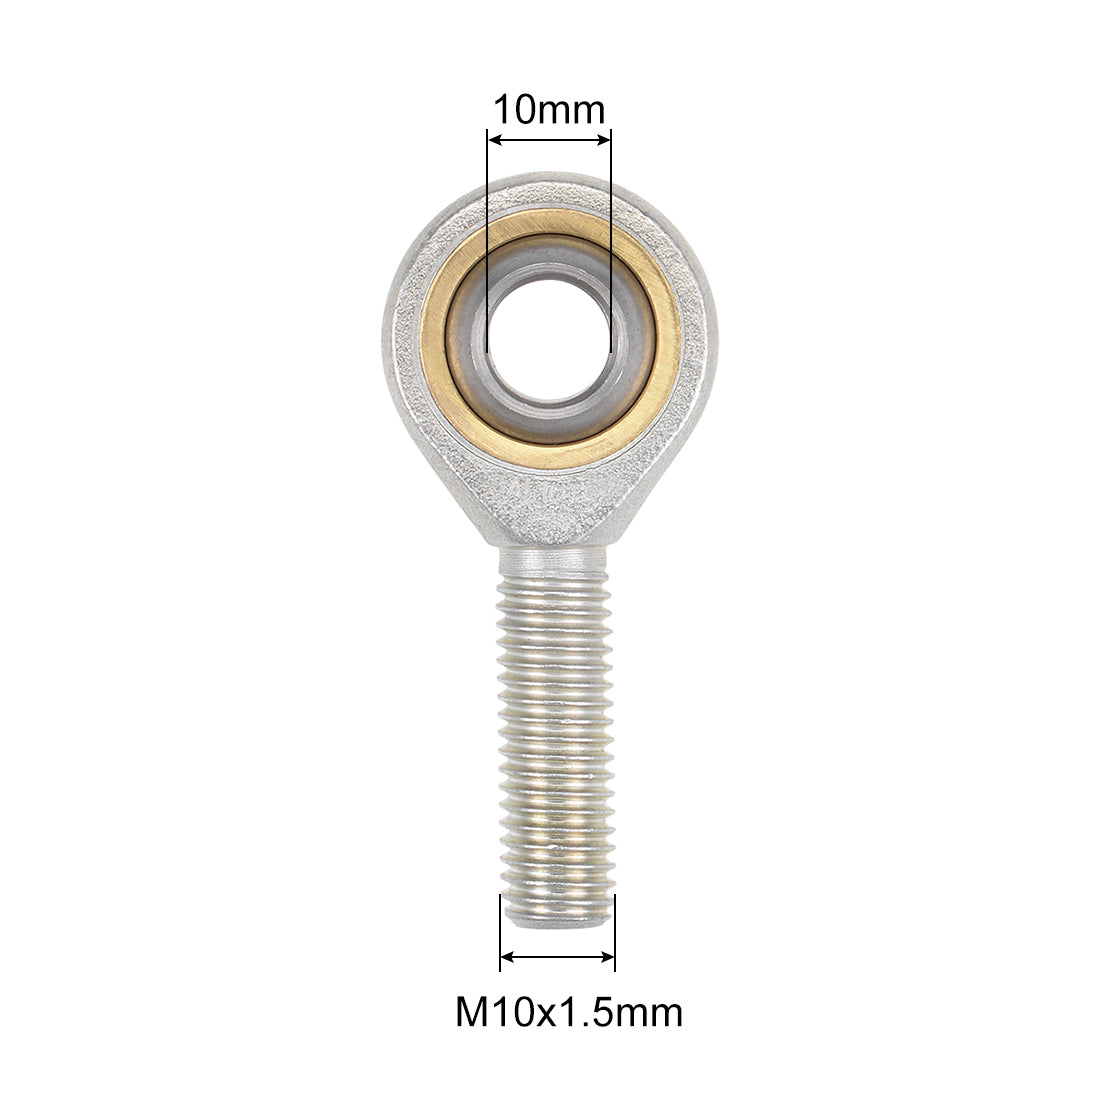 uxcell Uxcell 10mm Rod End Bearing M10x1.5mm Rod Ends Ball Joint Male Left Hand Thread 2pcs